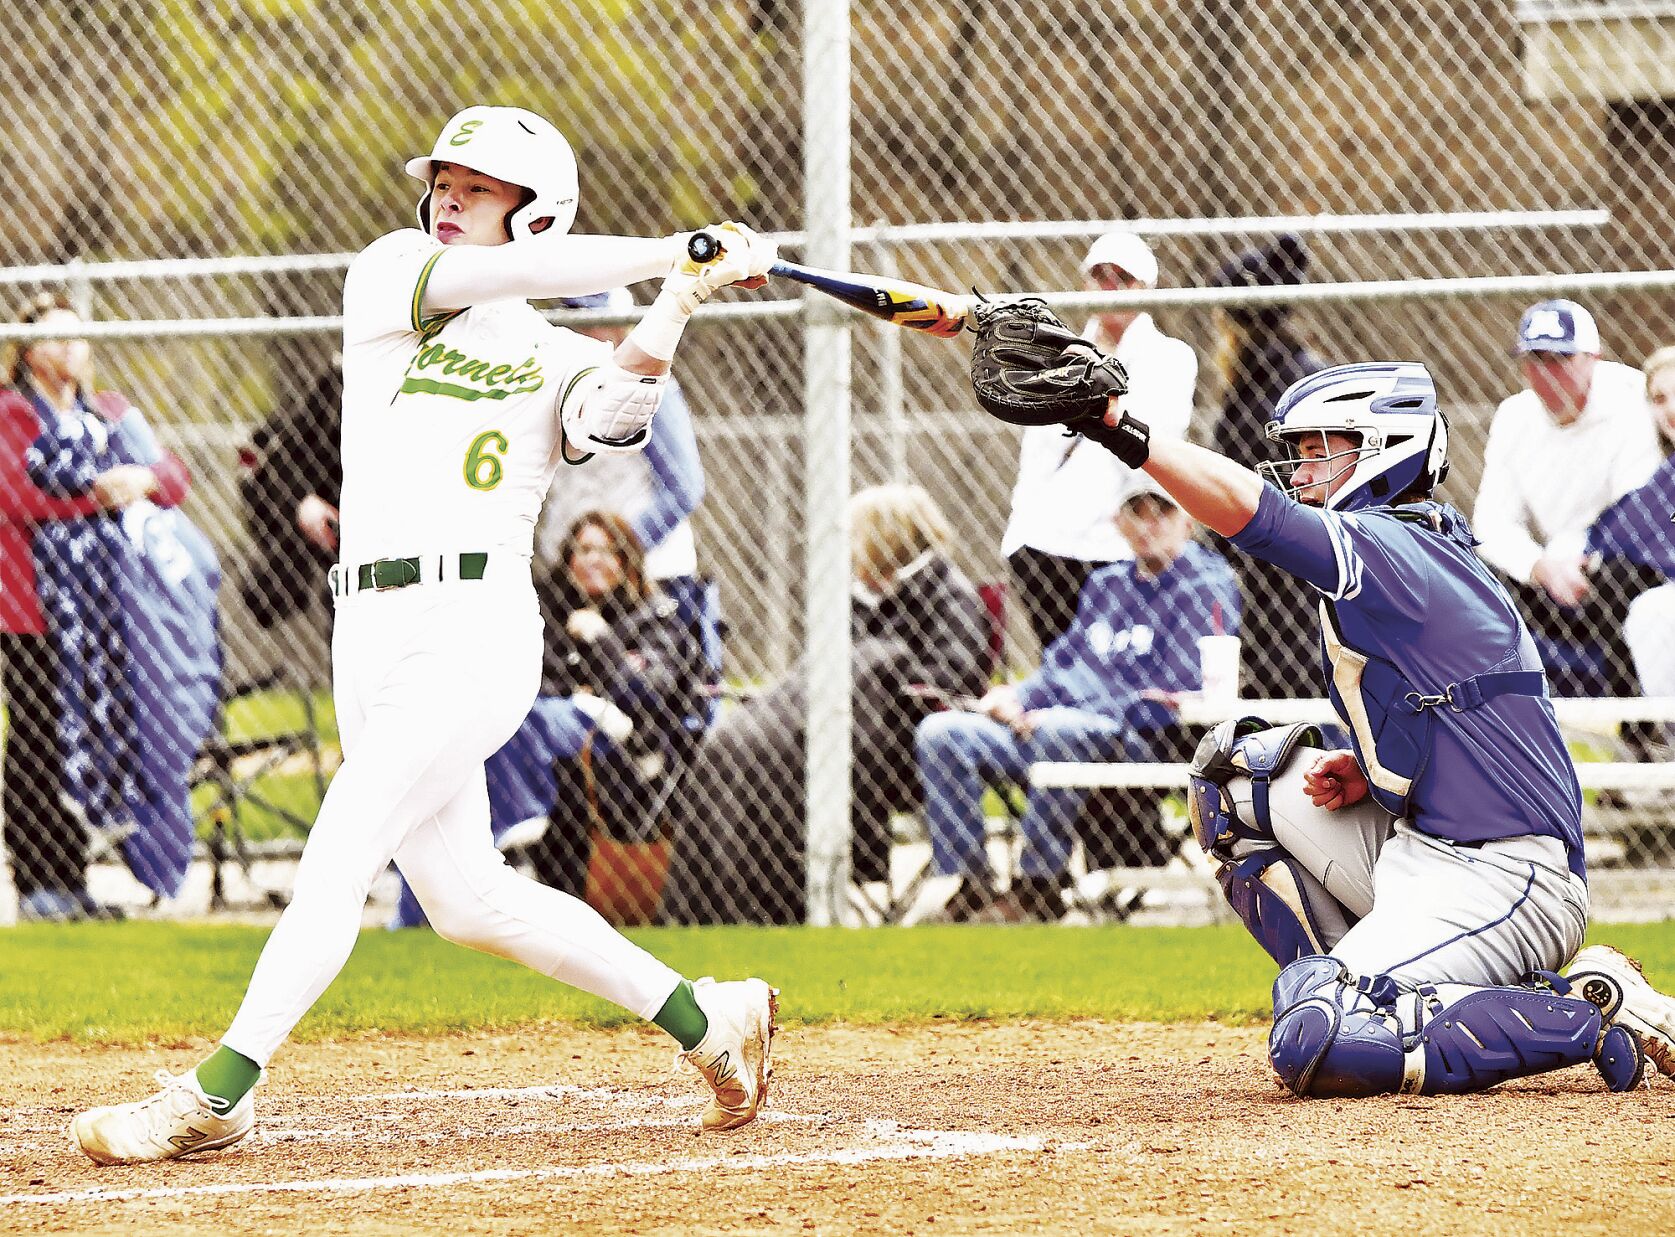 Hornets continue to sting the baseball during winning streak